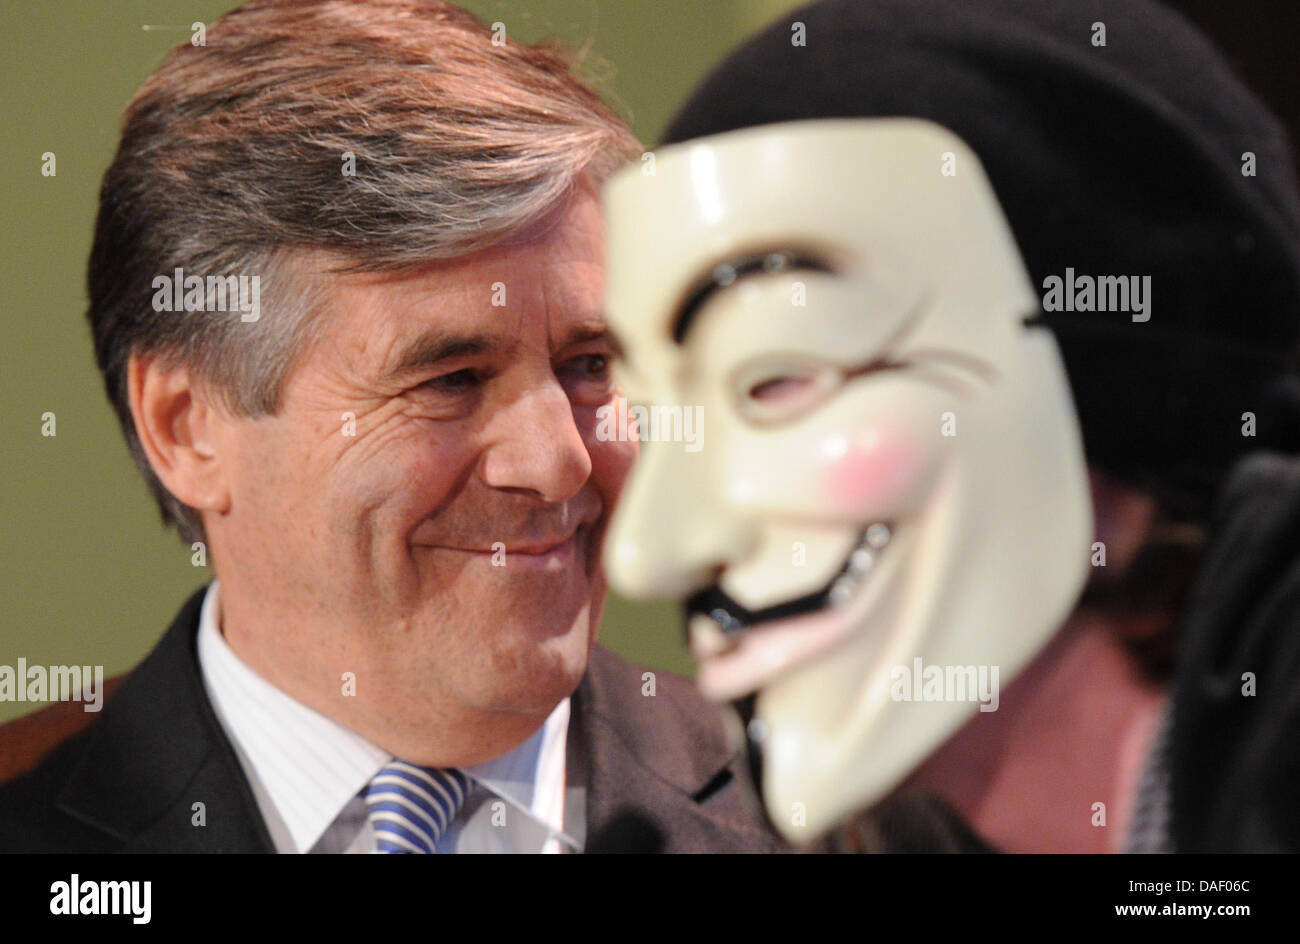 An Occupy activist wearing a Guy Fawkes mask interrupts Joseph Ackermann, CEO of Deutsche Bank, during his speech to the members' meeting of the Ehrbarer Kaufmann (Honorable Merchants) in Hamburg, Germany, 22 November 2011. Several activists of the Occupy movement disrupted the speech of the bank chief and stormed the podium at the chamber of commerce in Hamburg. Photo: MARCUS BRAN Stock Photo